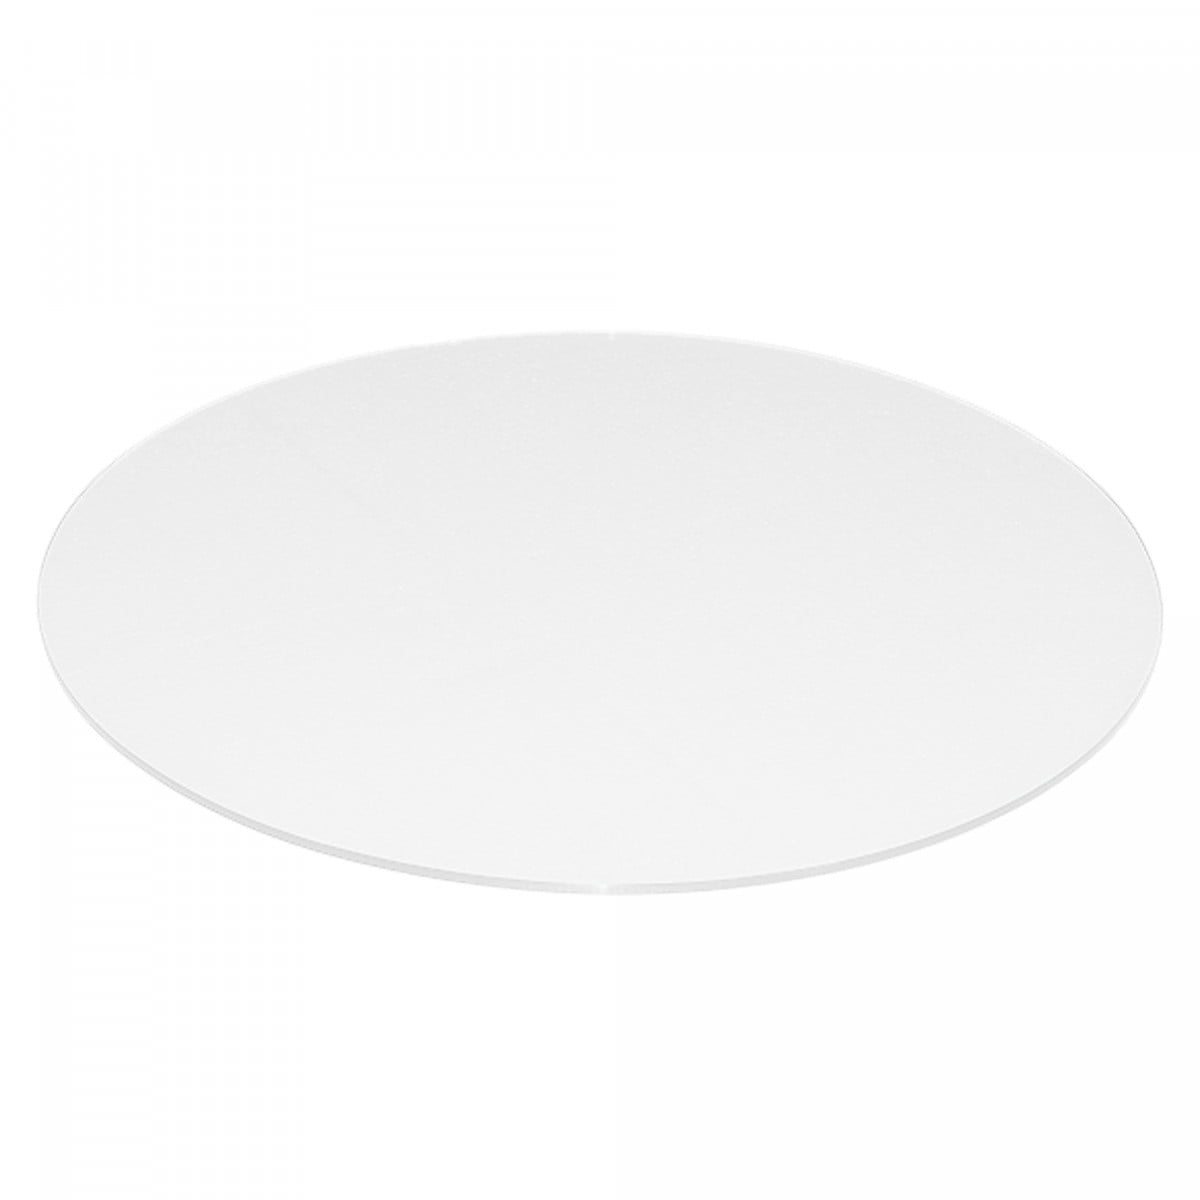 40 Inch Round Glass Table Top 3 8, 40 Round Glass Table Top Protector